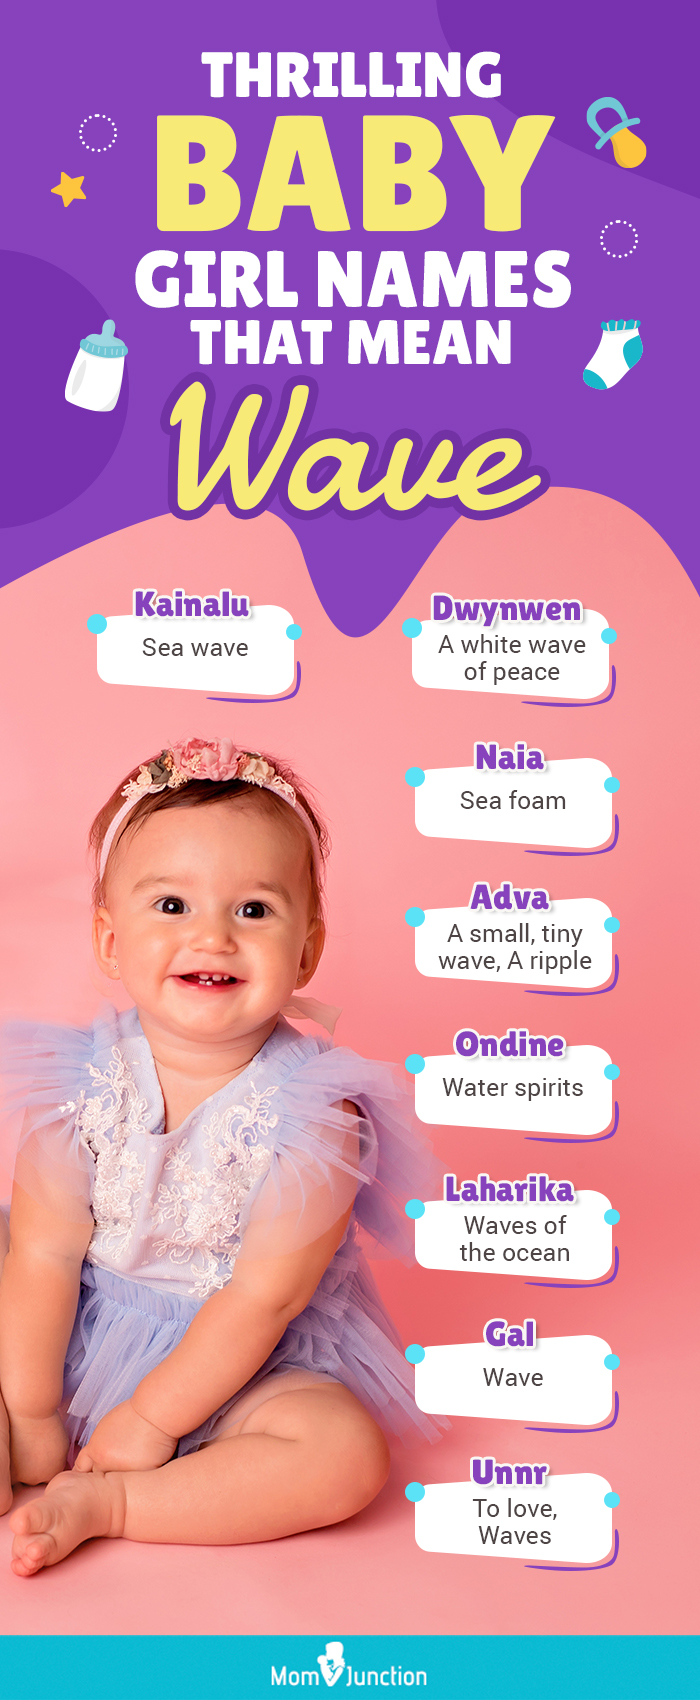 thrilling baby girl names that mean wave (infographic)